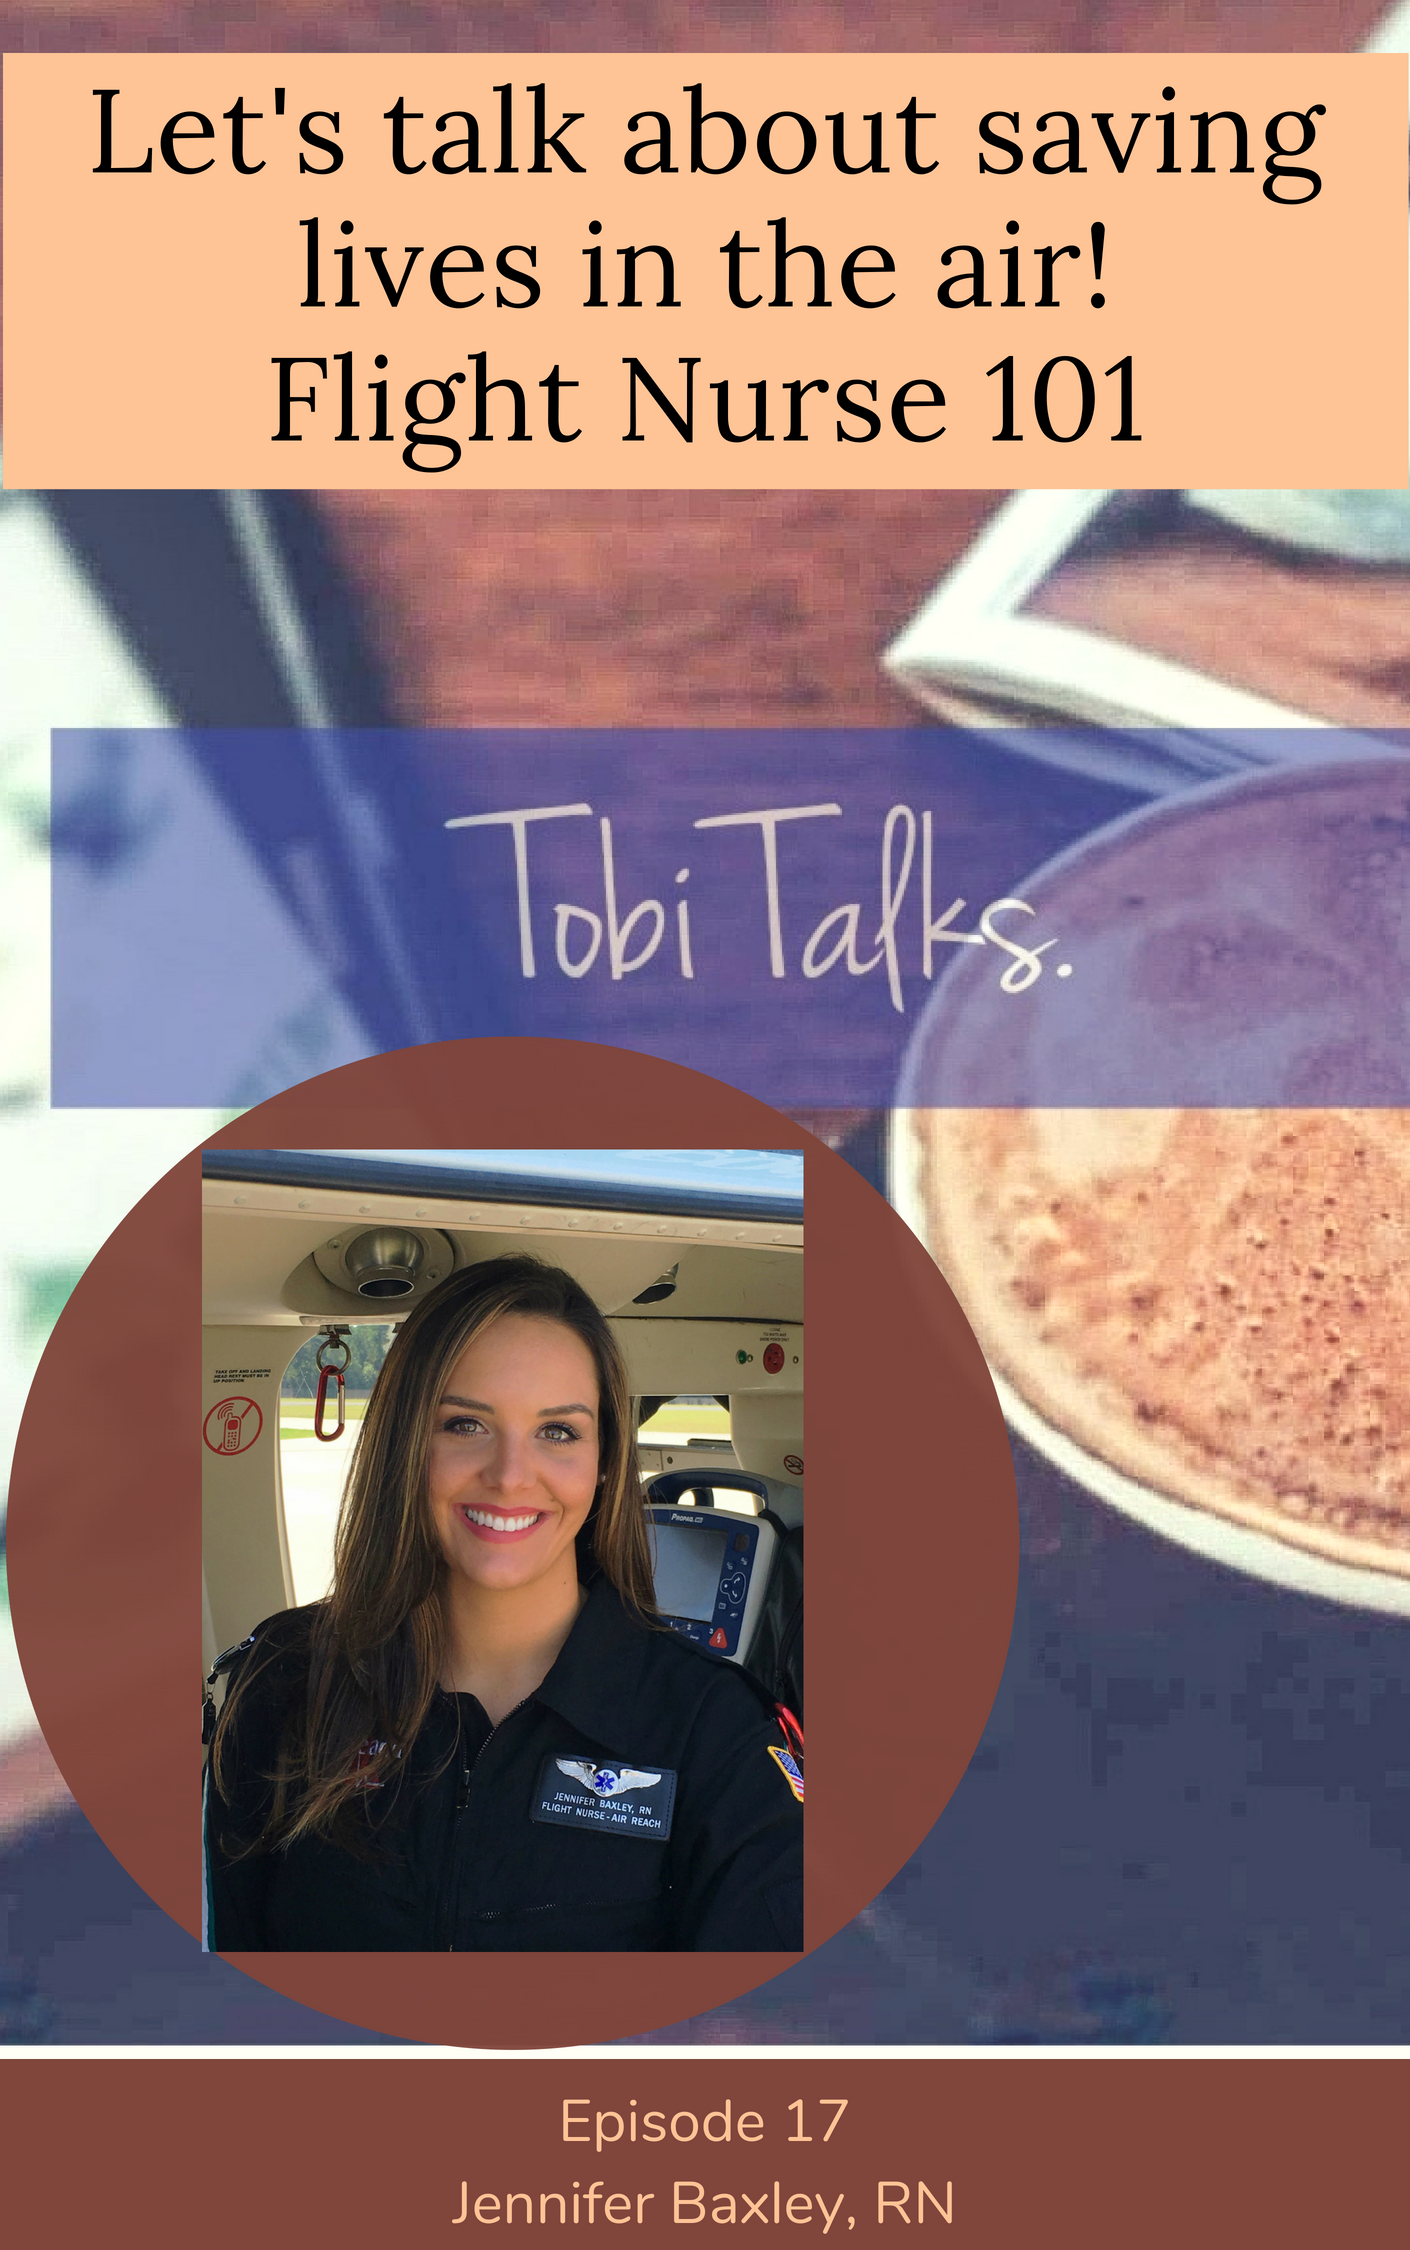 Let’s talk about saving lives in the air! Flight Nurse 101